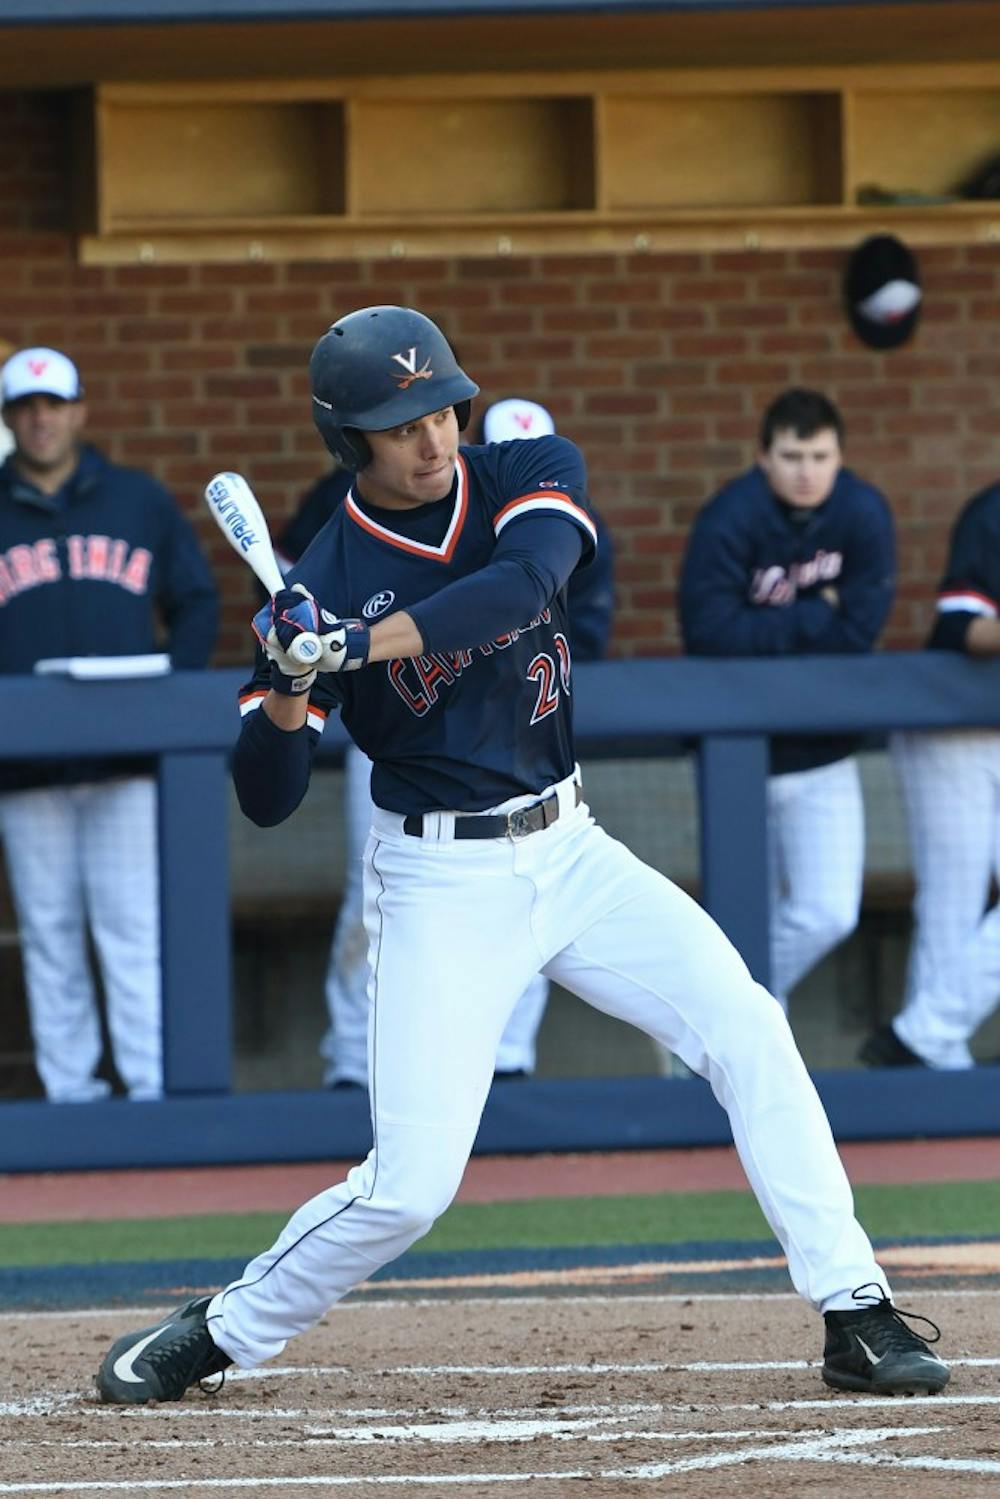 <p>In Virginia's last series against Notre Dame, sophomore outfielder Cameron Simmons went 3-5 in one game, including an RBI. Simmons hopes to continue his hot streak into this weekend's series.</p>